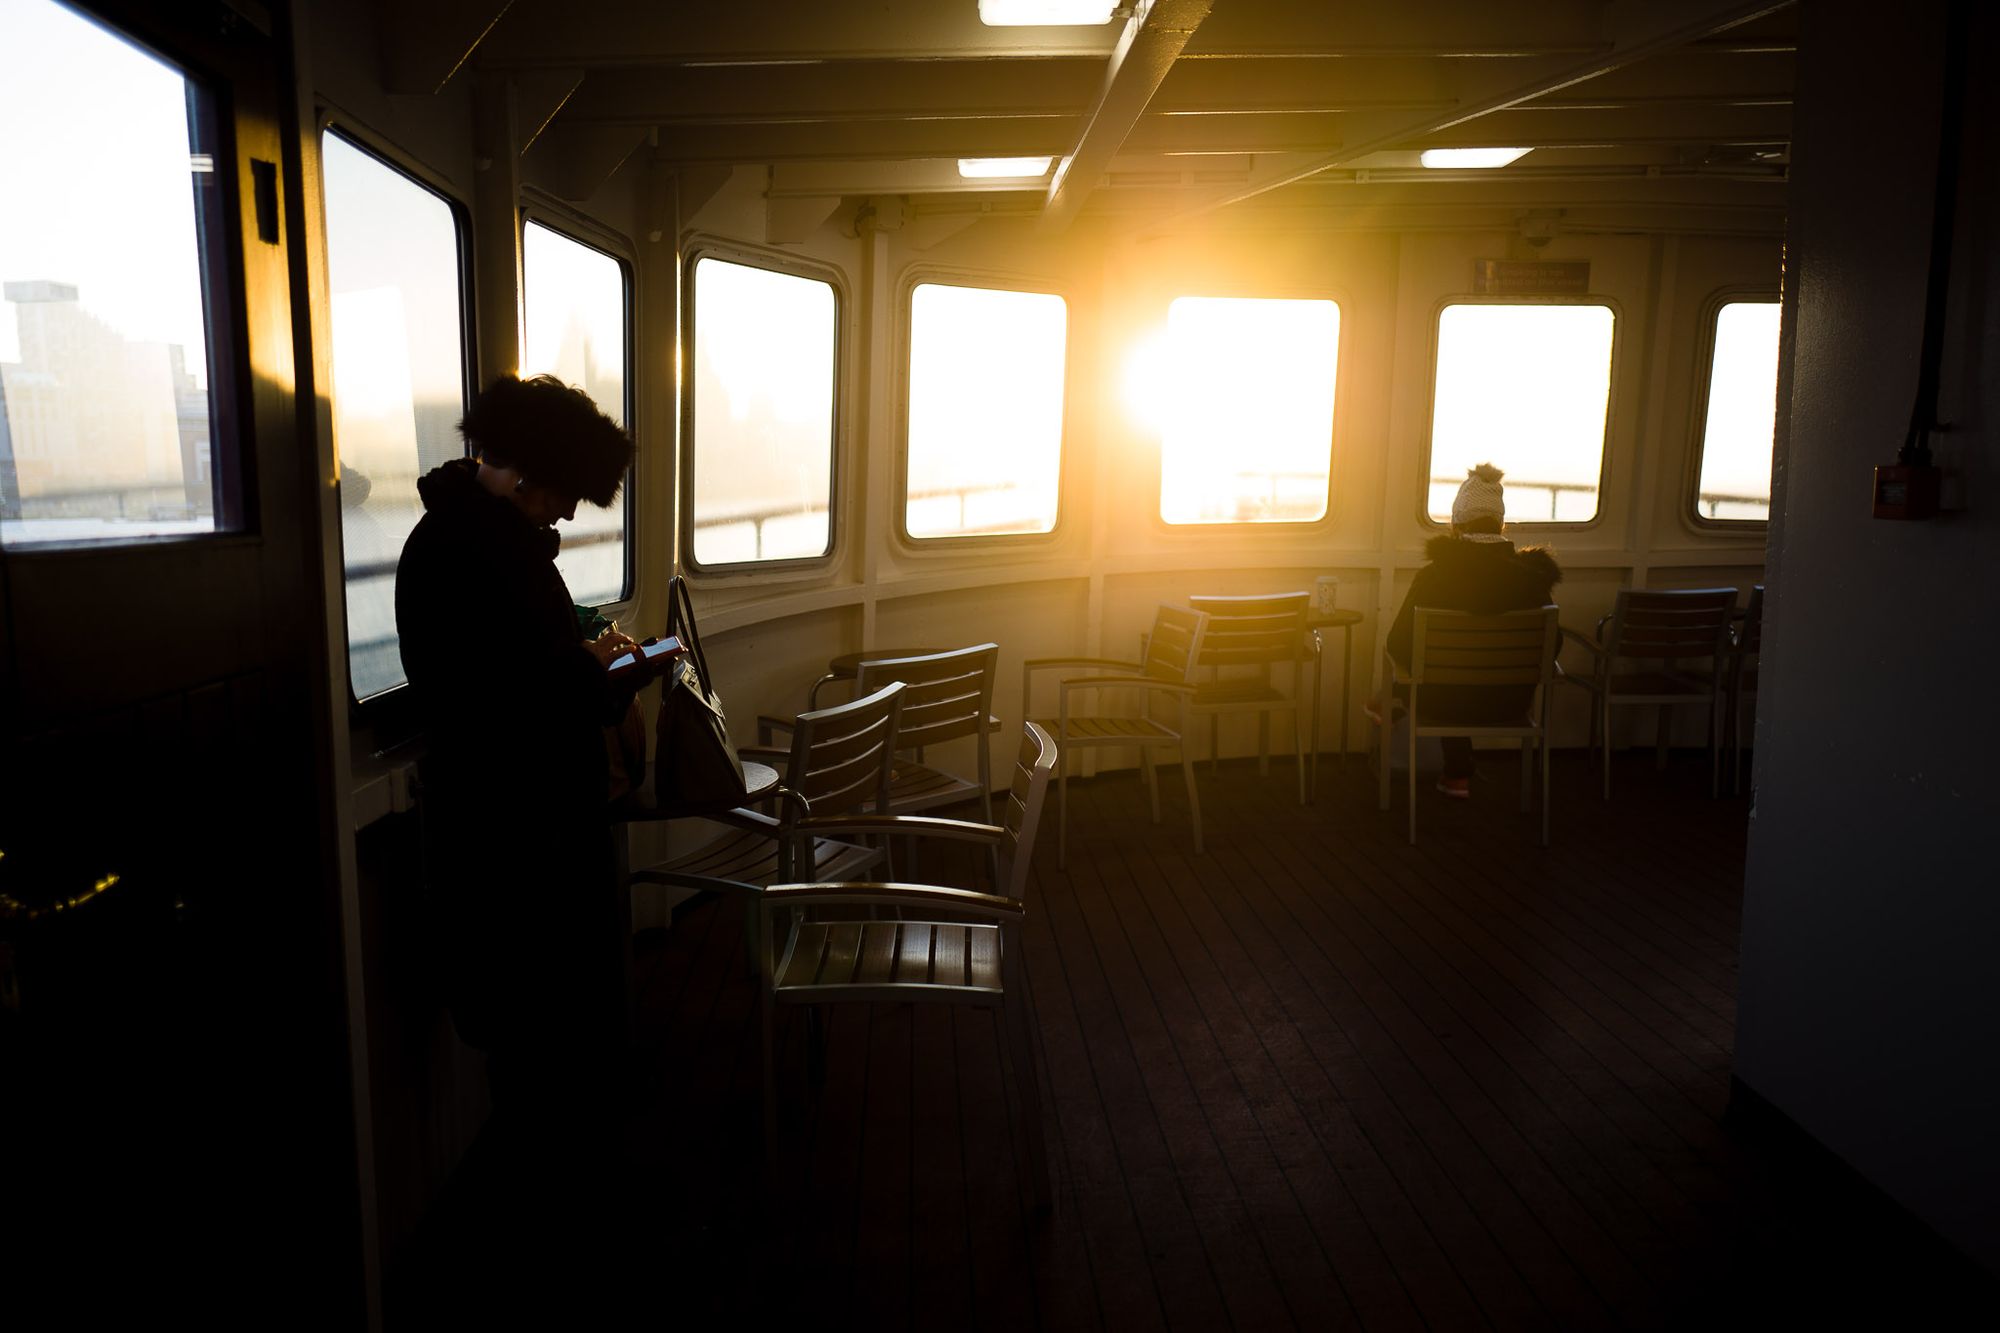 Sunrise through the window of a Mersey Ferry. A person stands on the left and another sits on the right.